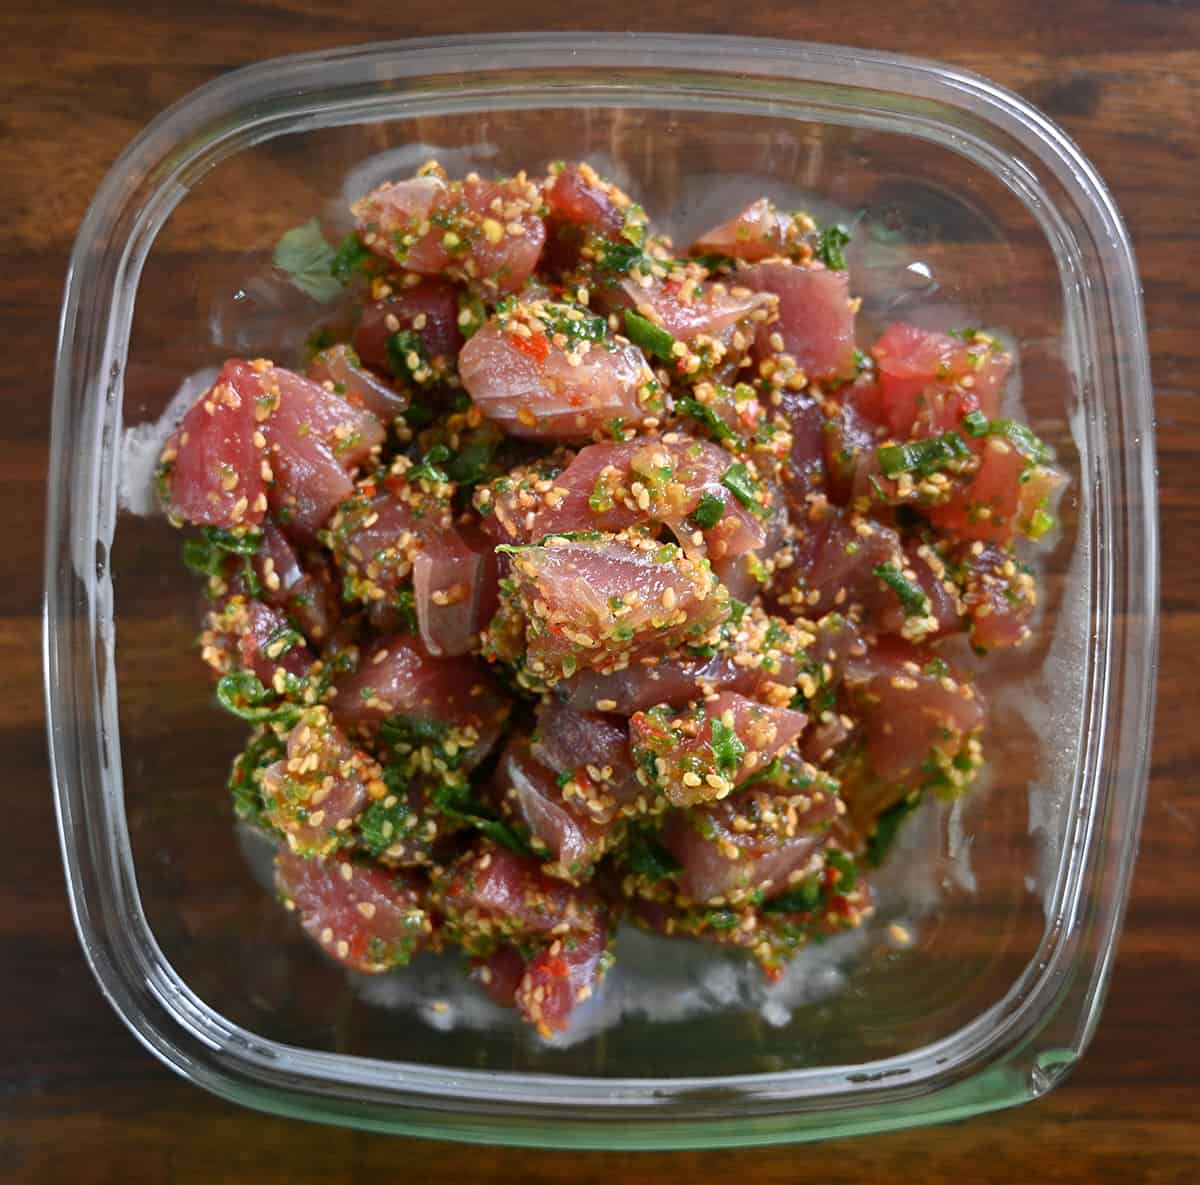 Top down image of an open container of the Ahi Wasabi Poke. There are sesame seeds covering the poke.